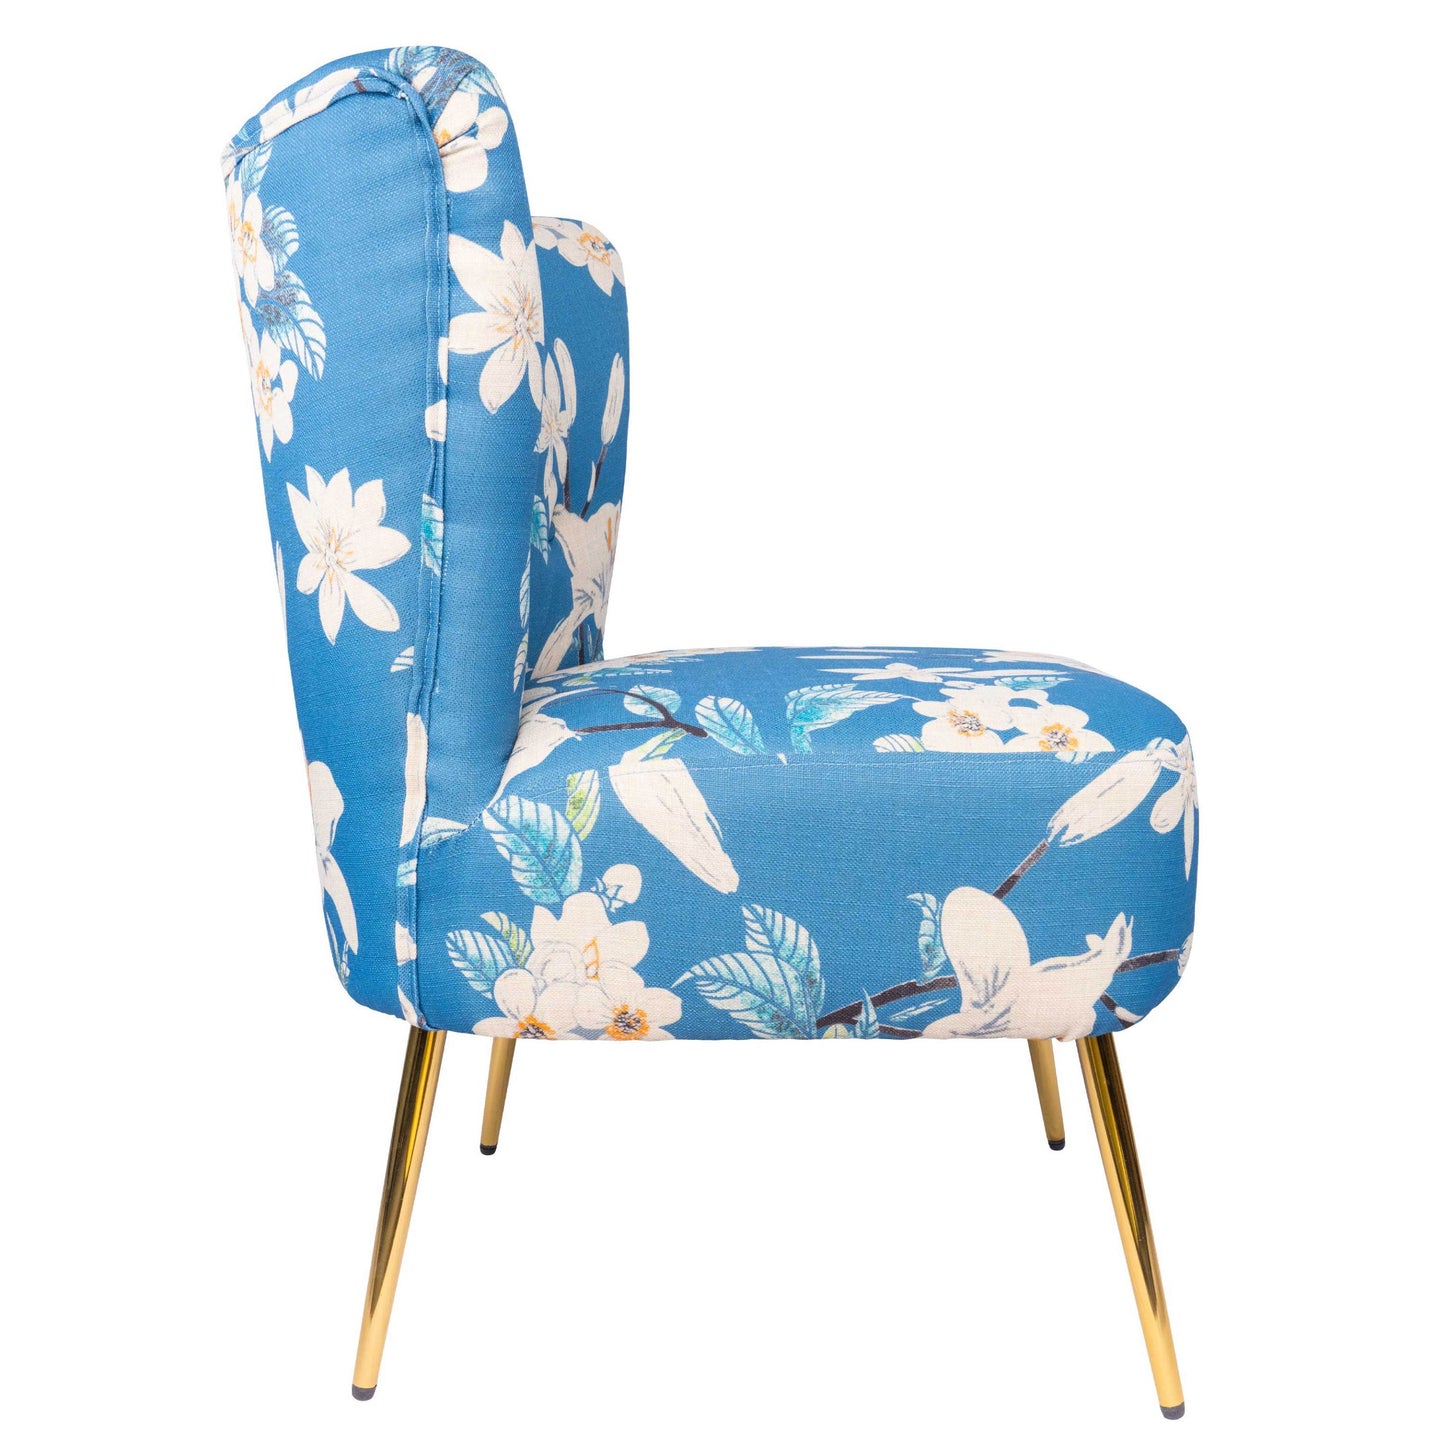 Modern Accent Chair, Fabric Living Room Chair, Bedroom Chair with Thick Sponge Cushion